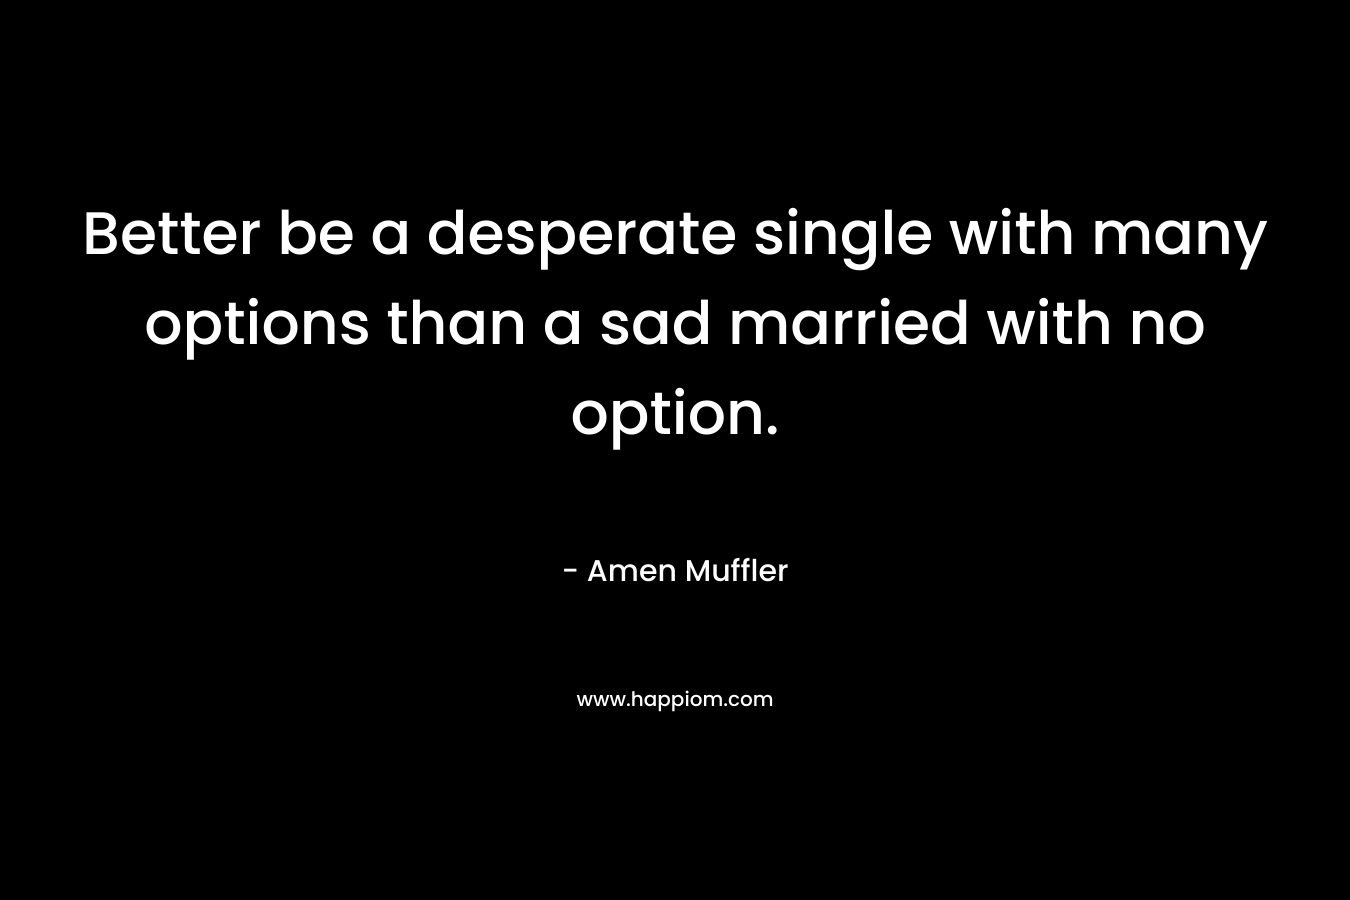 Better be a desperate single with many options than a sad married with no option. – Amen Muffler